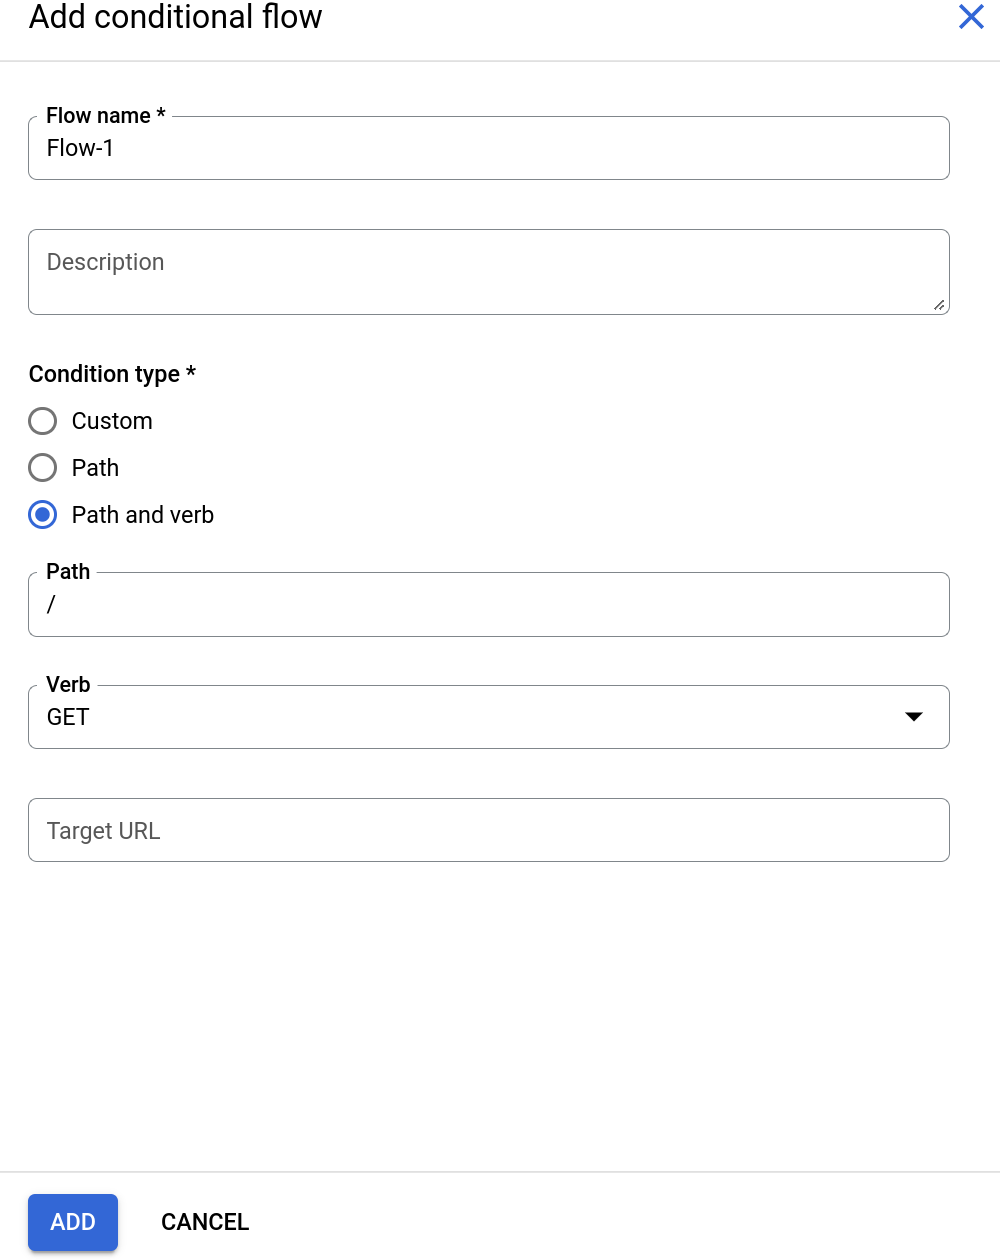 Add conditional flow button